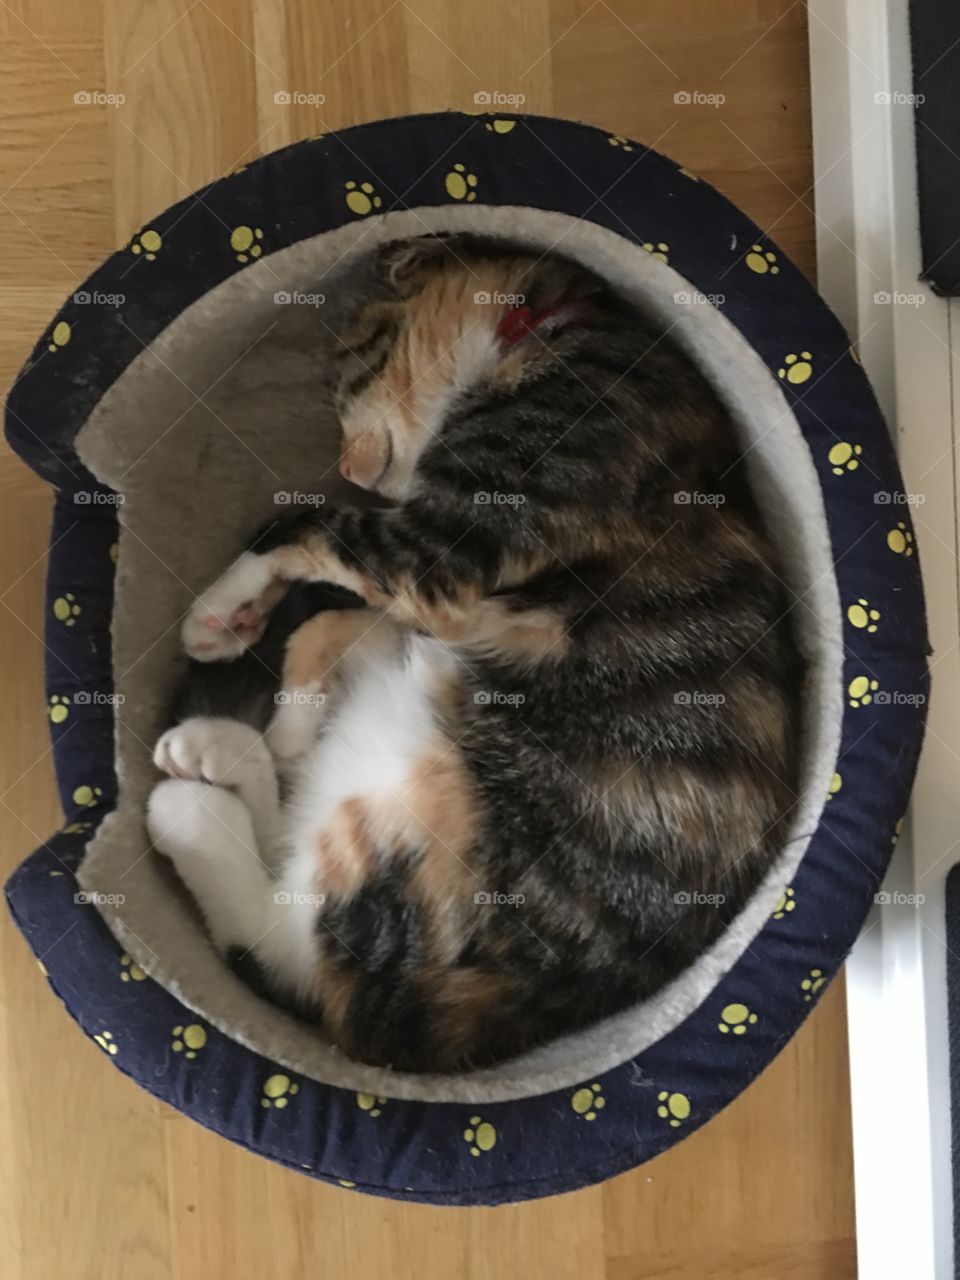 Cat sleeping in a dog bed while the dog is watching